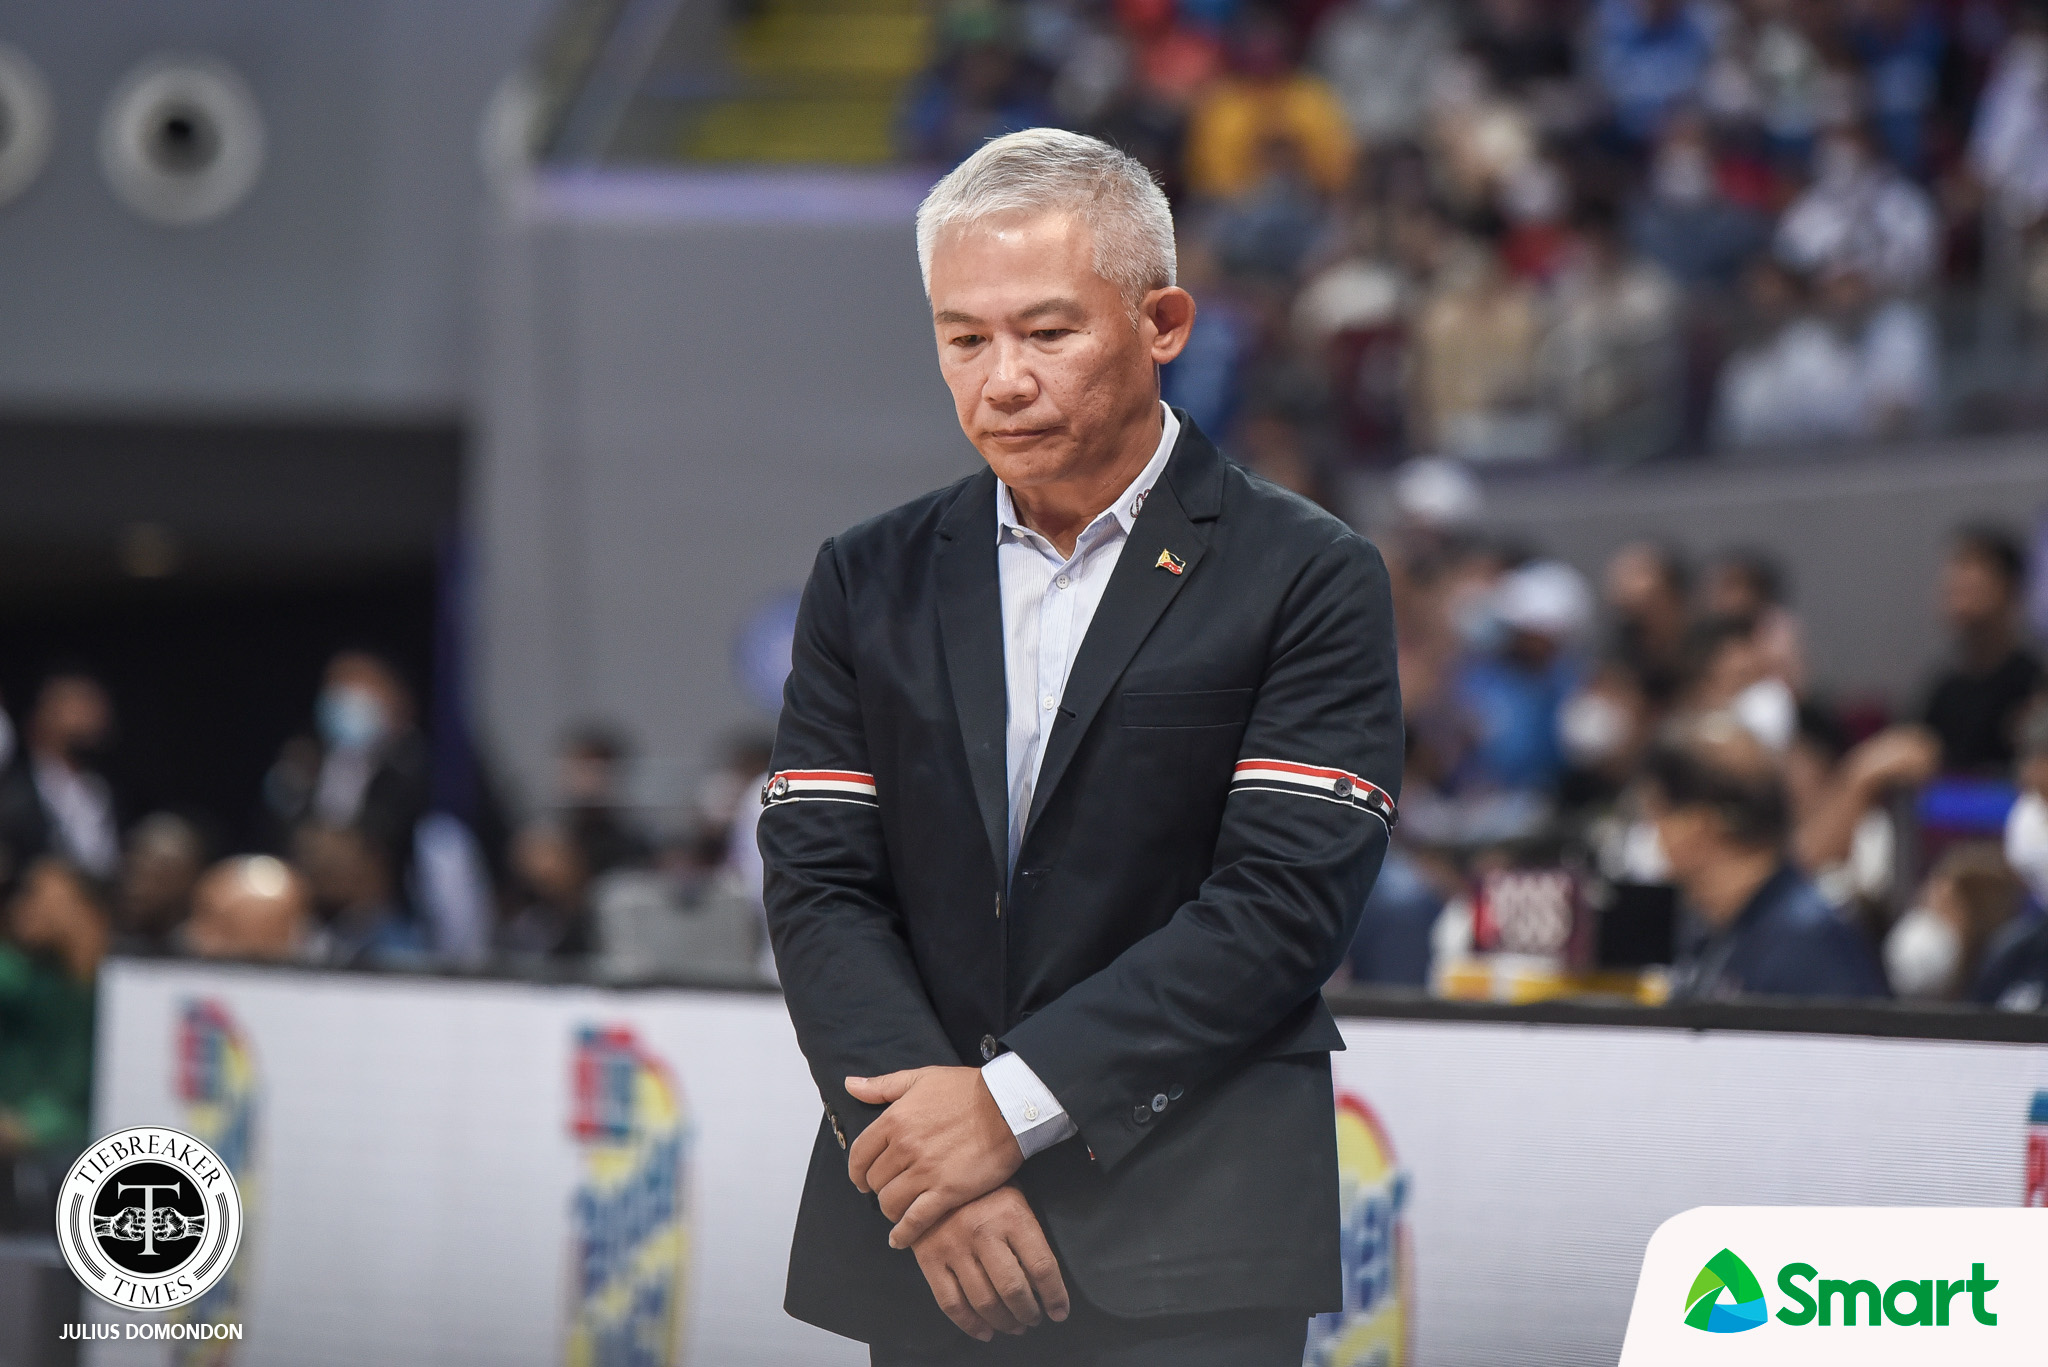 2023-FIBA-World-Cup-Asian-Qualifiers-Chot-Reyes-2 Tab Baldwin sheds light on Gilas departure in hope of putting end to saga 2023 FIBA World Cup Basketball Gilas Pilipinas News  - philippine sports news